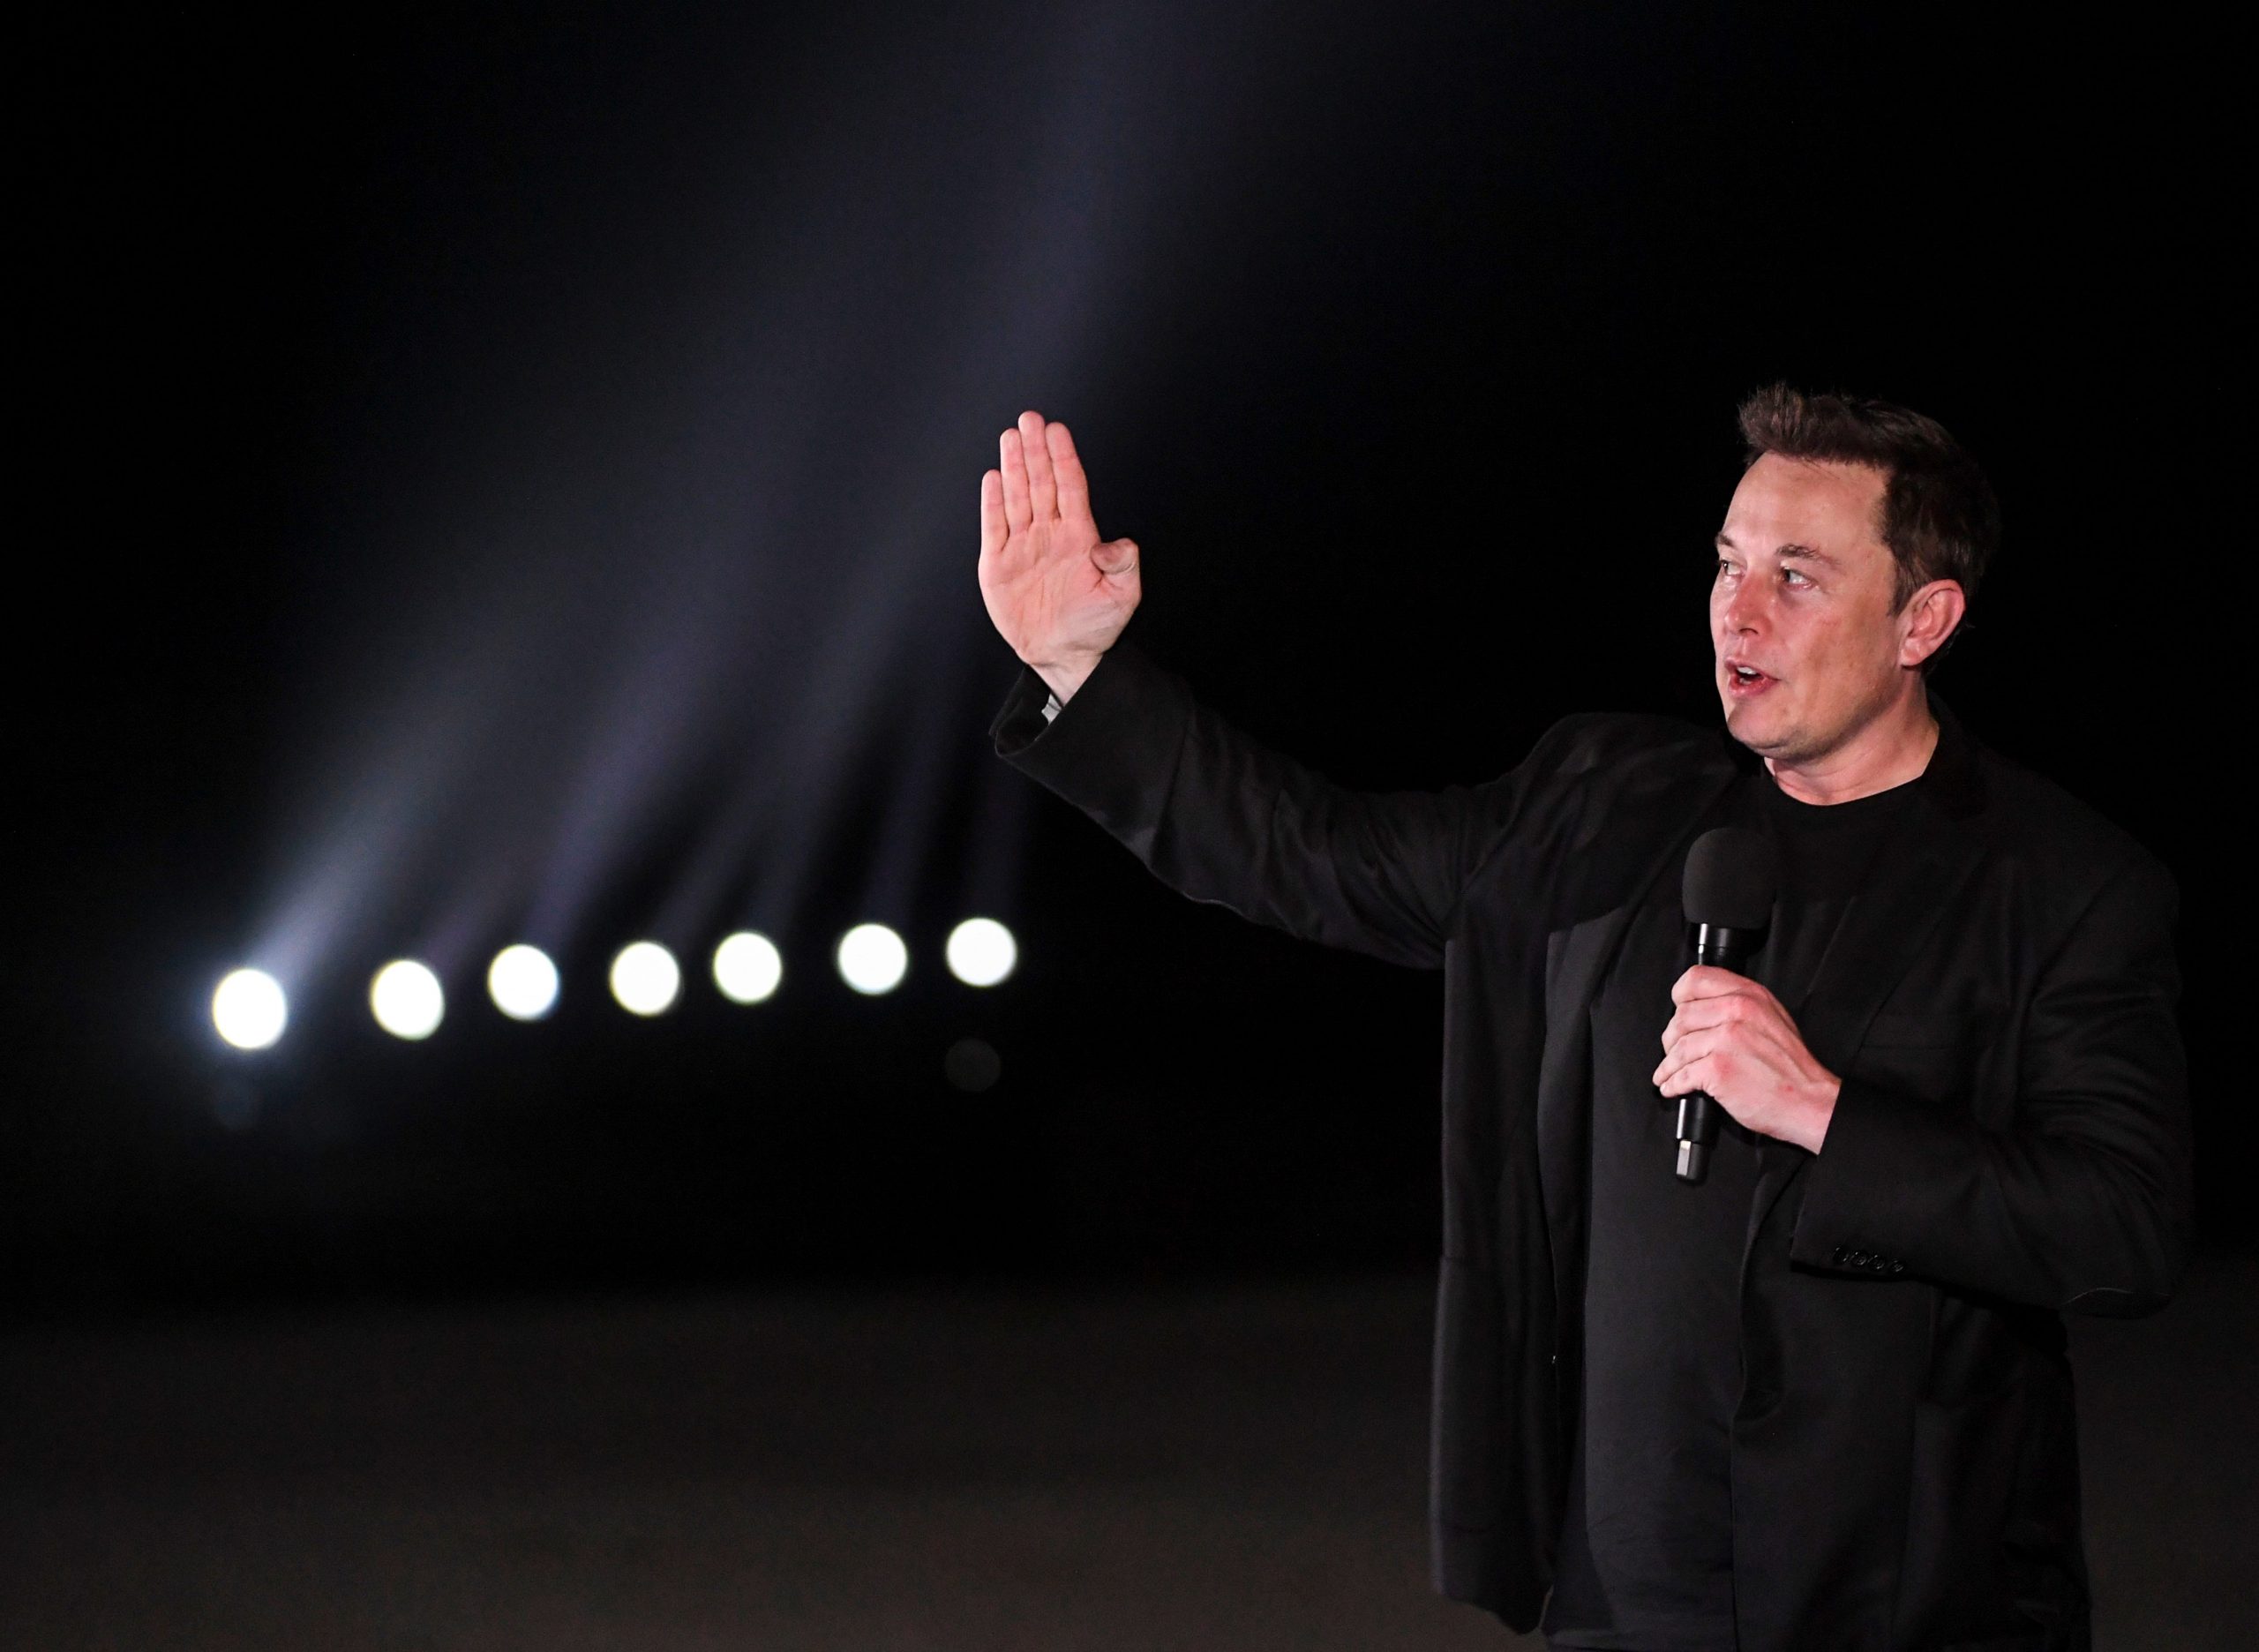 SpaceX CEO Elon Musk gives a presentation on his Starship rocket at their Boca Chica spaceport launch facility.